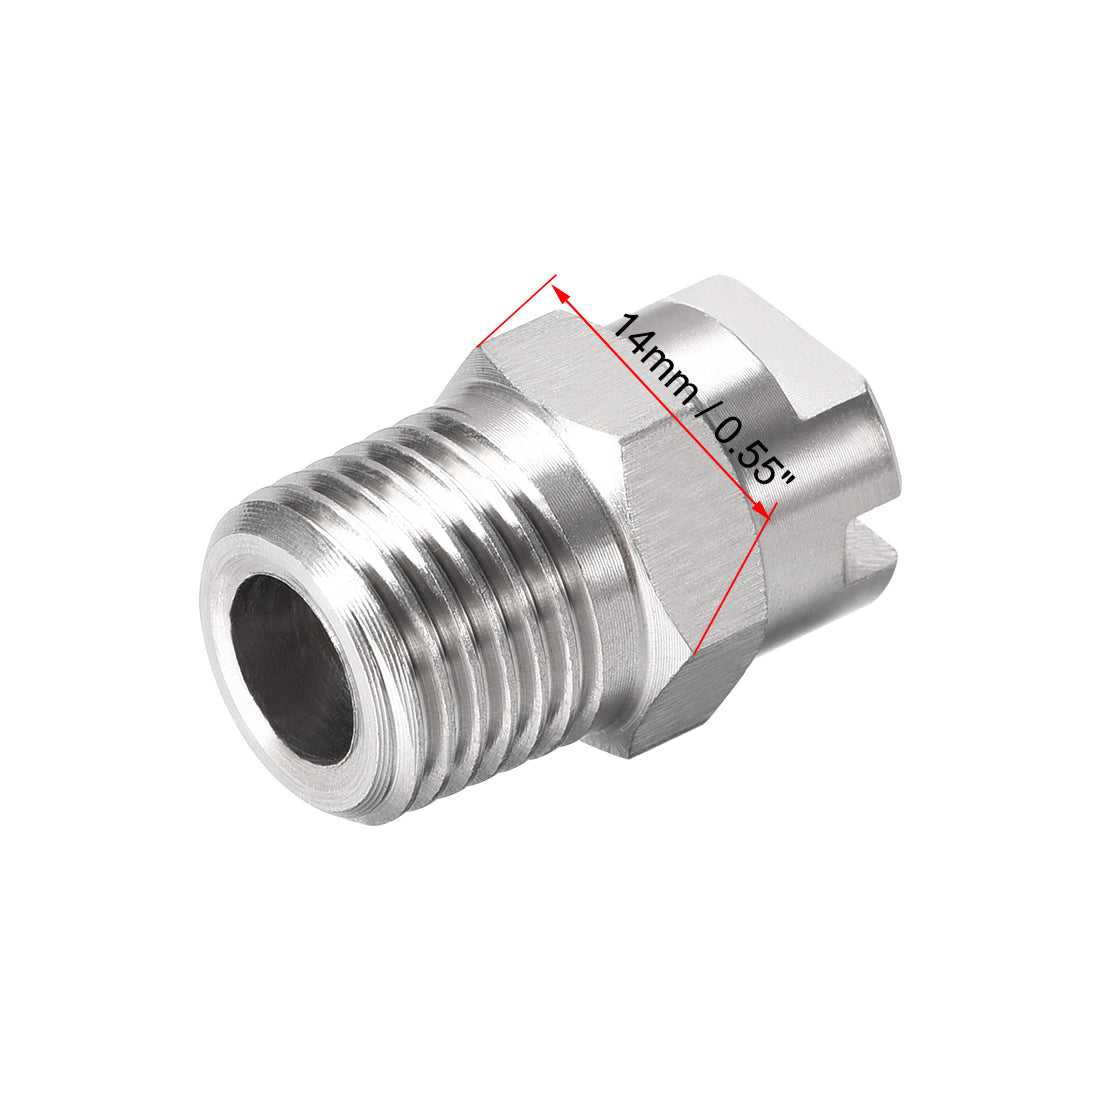 Uxcell Uxcell Flat Fan Spray Tip - 1/4BSPT Male Thread 304 Stainless Steel Nozzle - 110 Degree 1.1mm Orifice Diameter